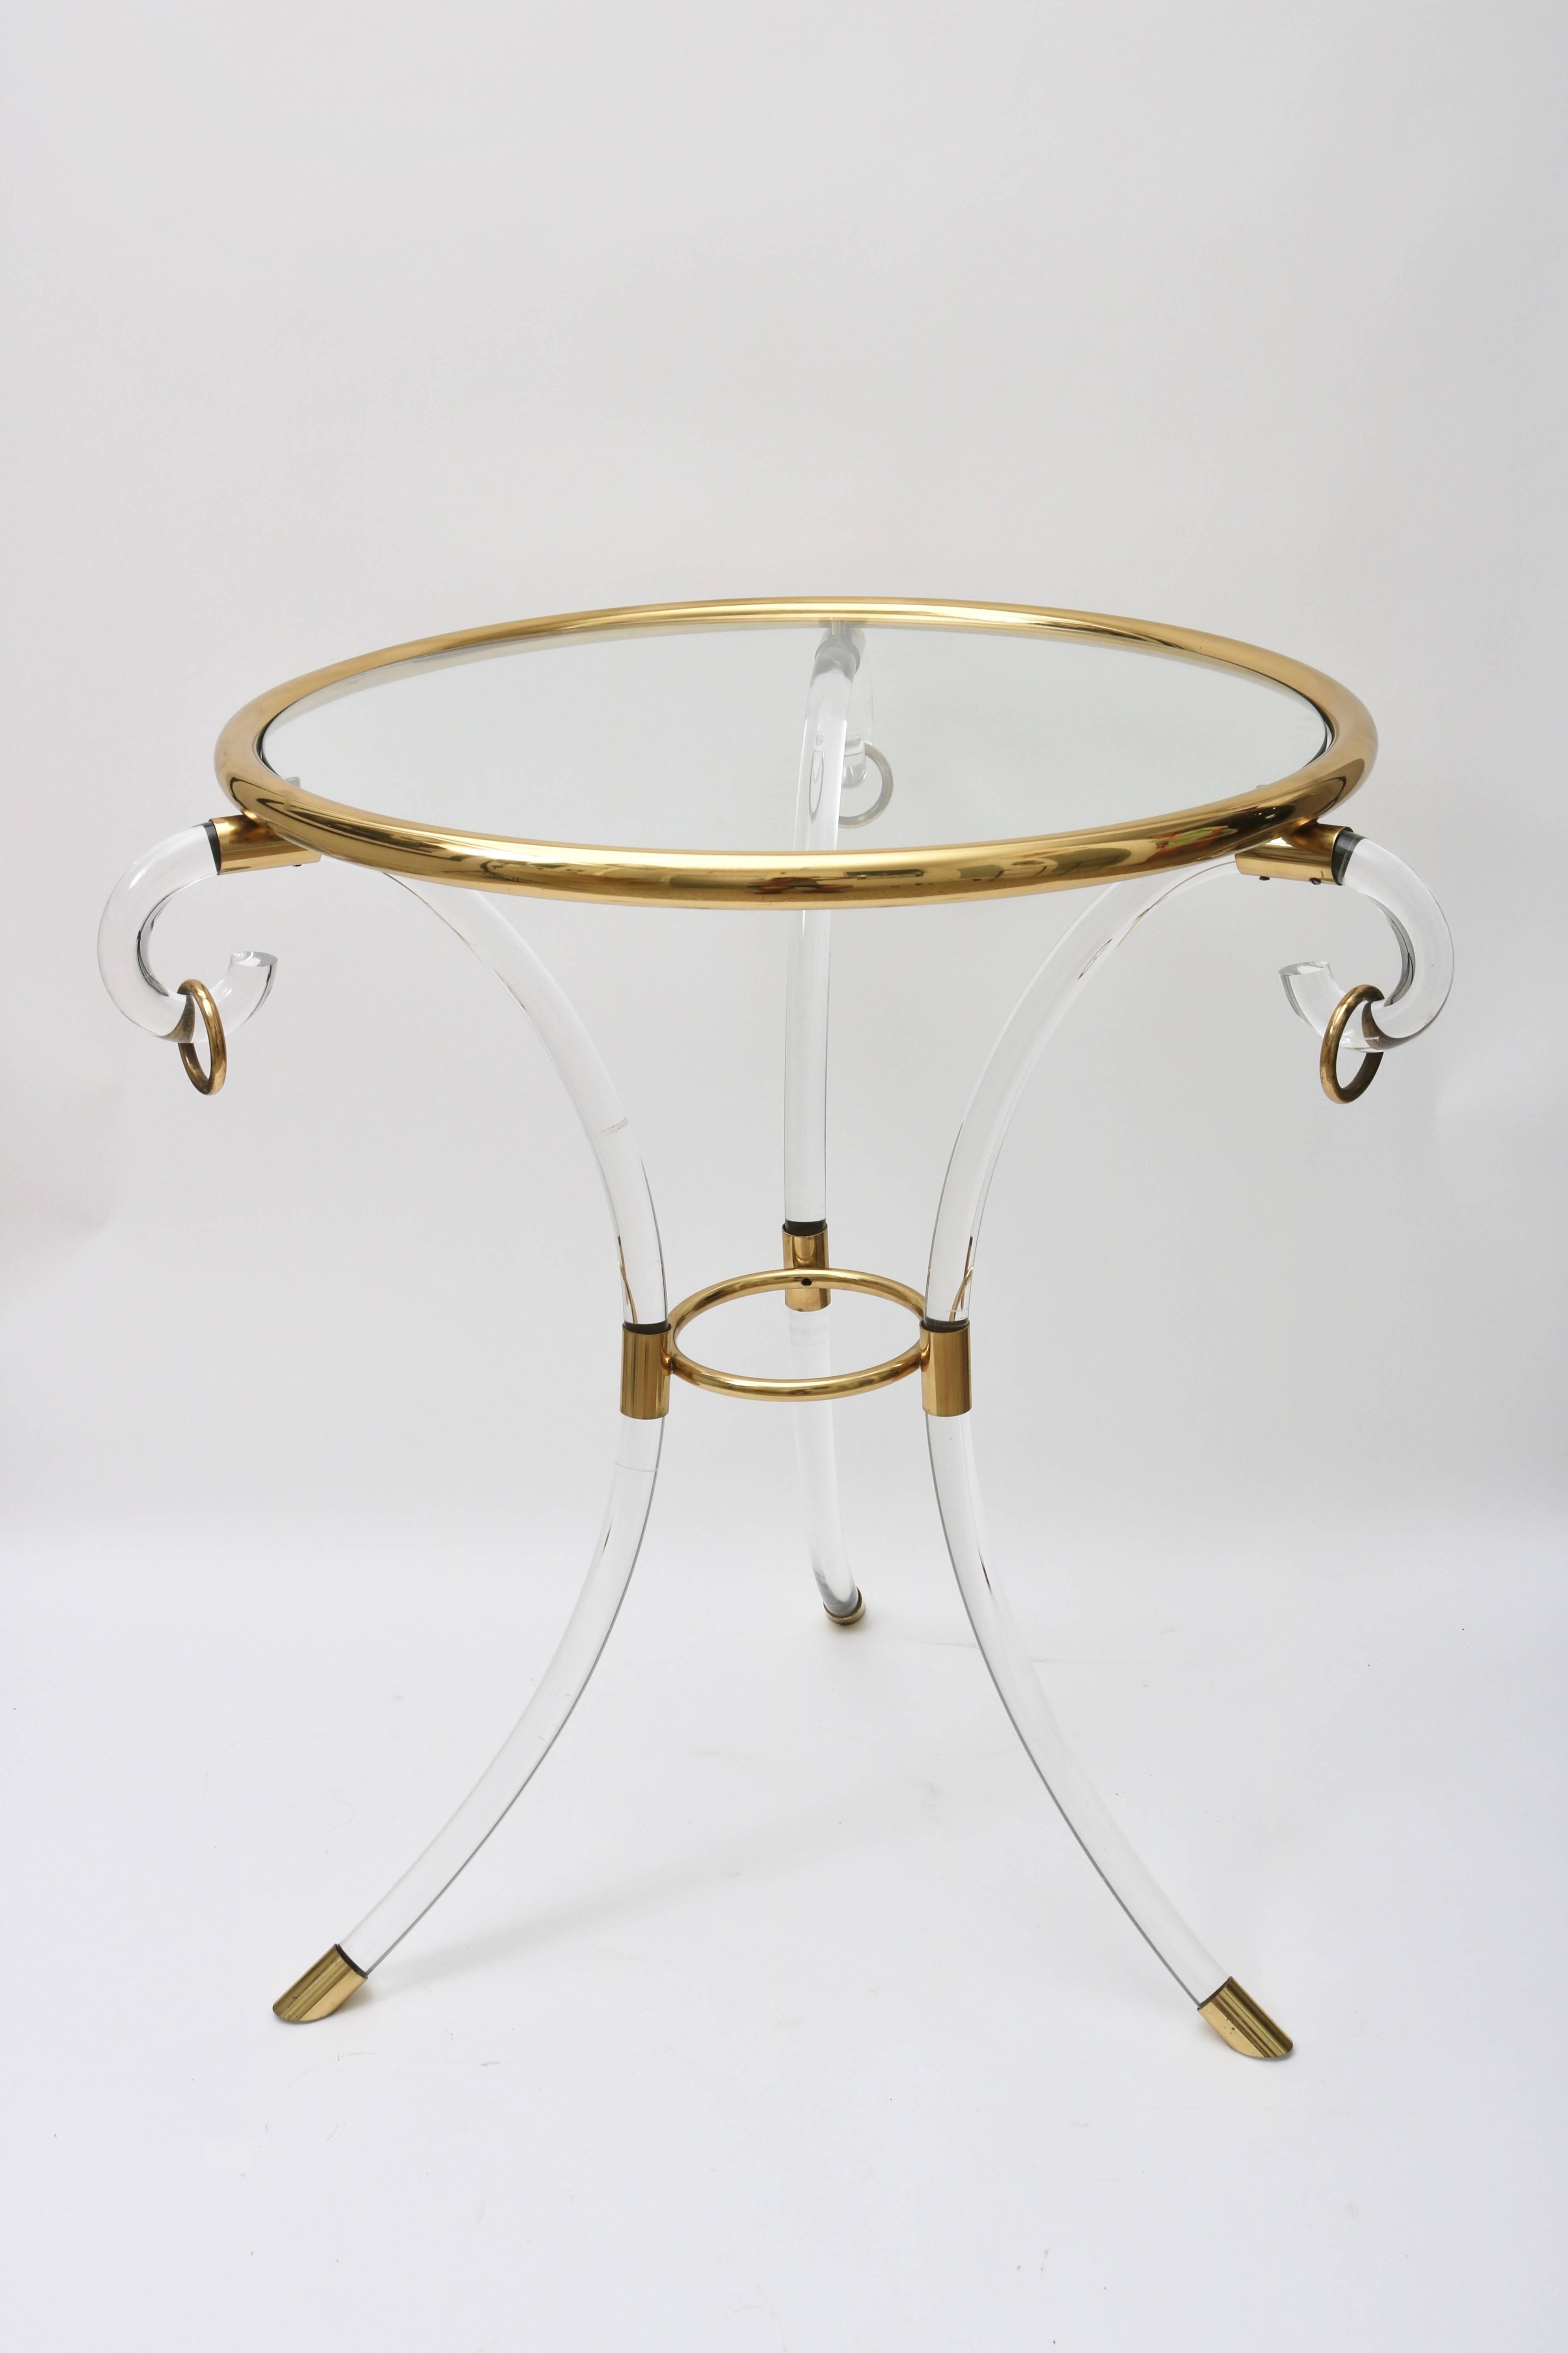 This rare and amazing guerdon tables was recently purchased in Italy and was designed by the iconic American furniture designer Charles Hollis Jones. The Lucite, brass and glass are in excellent condition and most importantly retains its original